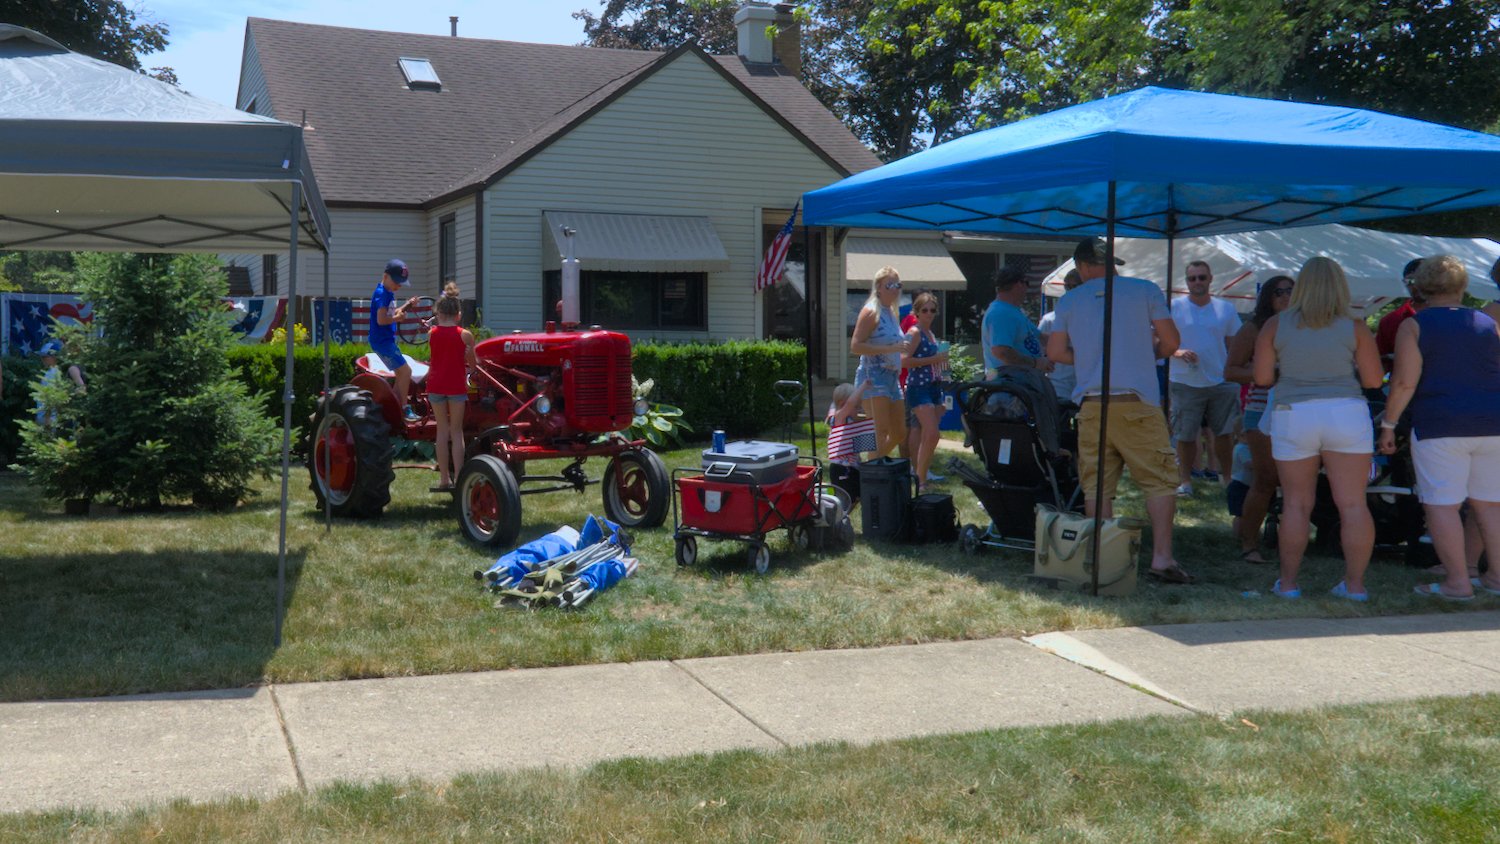 Farmall tractor parked in yard next to canopy of parade goers.